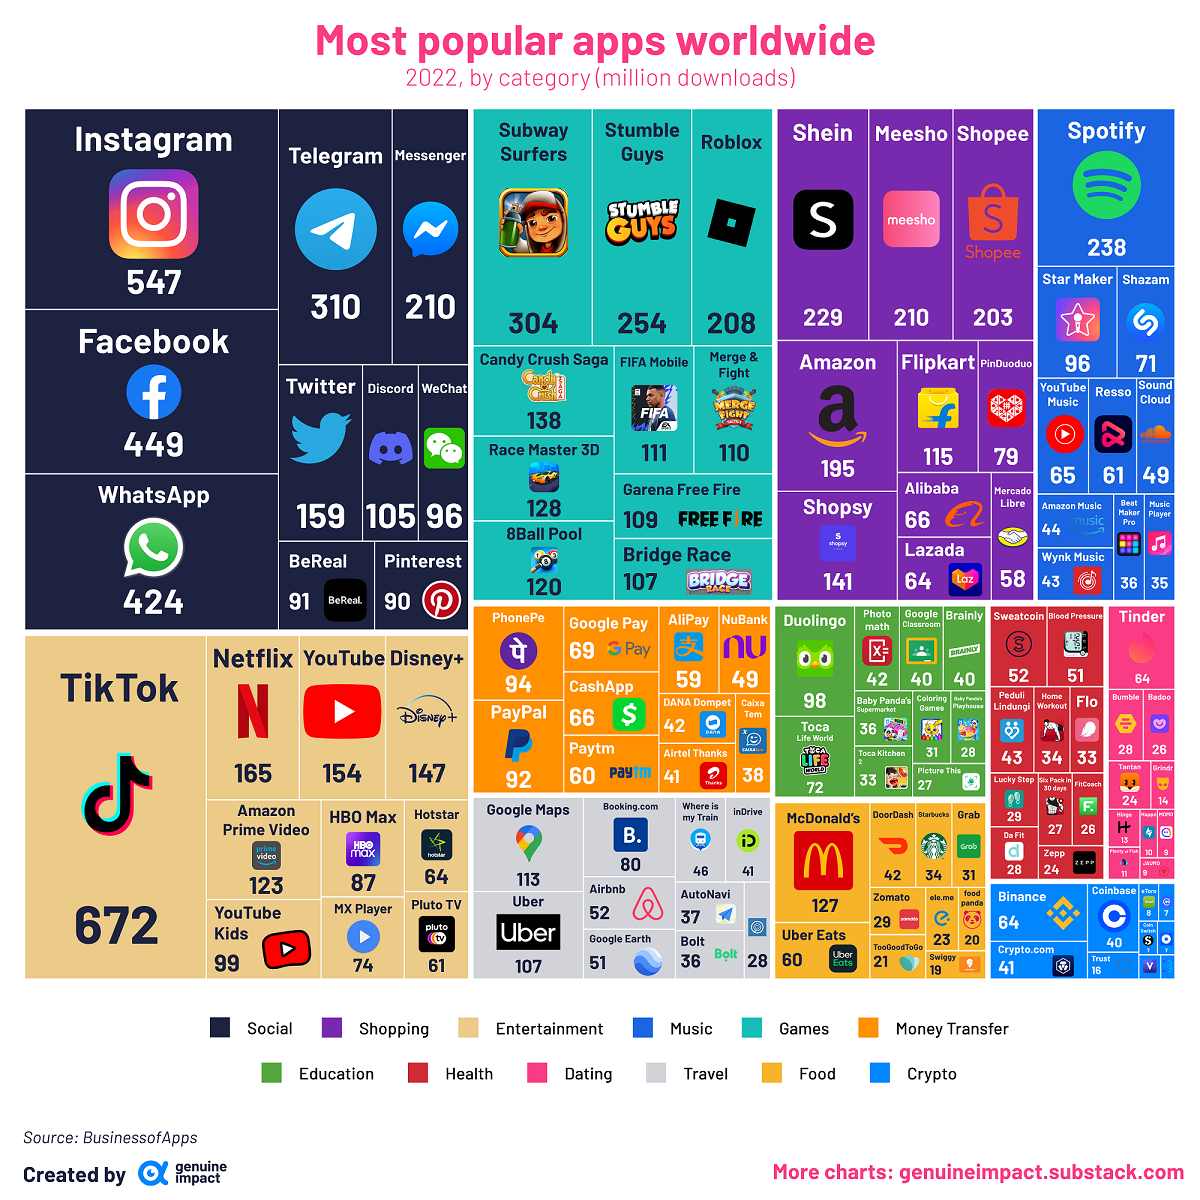 the most popular apps by downloads in 2022